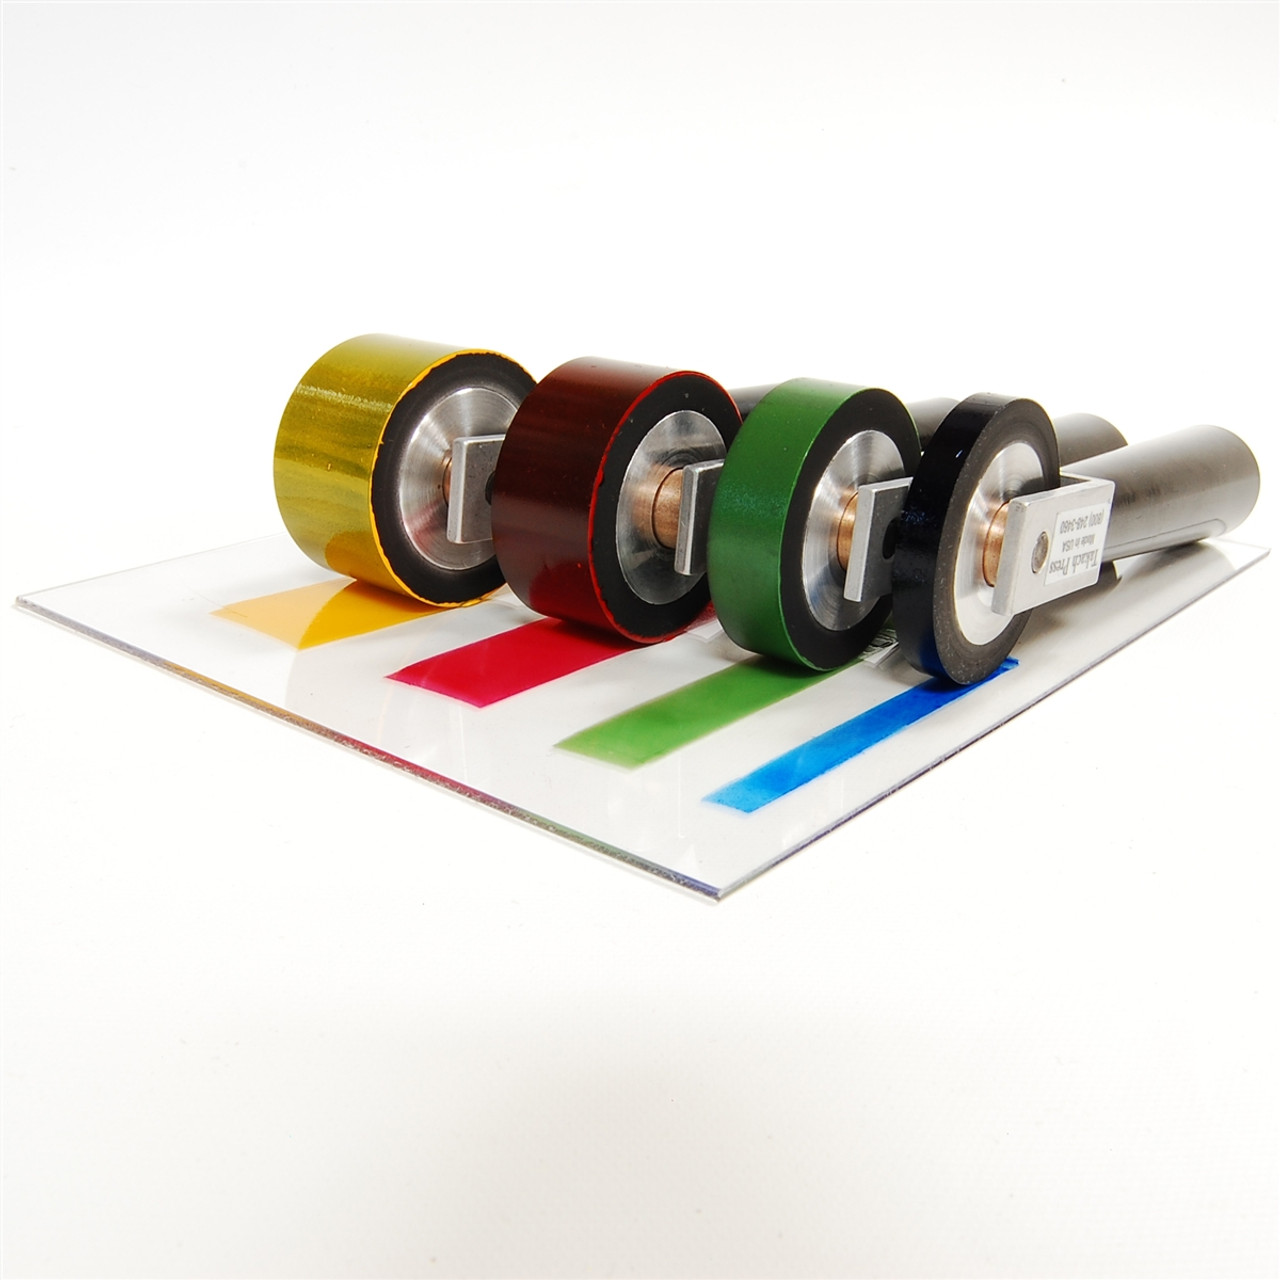 Takach Press - Hand Inking Rollers for Lithography and Etching, Roller  Service, Specialty Brayers, Hand Brayers, Grabit Rollers, Leather Rollers,  Rubber Roller, Mini Brayers, Varn Roller Wash, Roller Cuffs, Speed Ball  Rubber